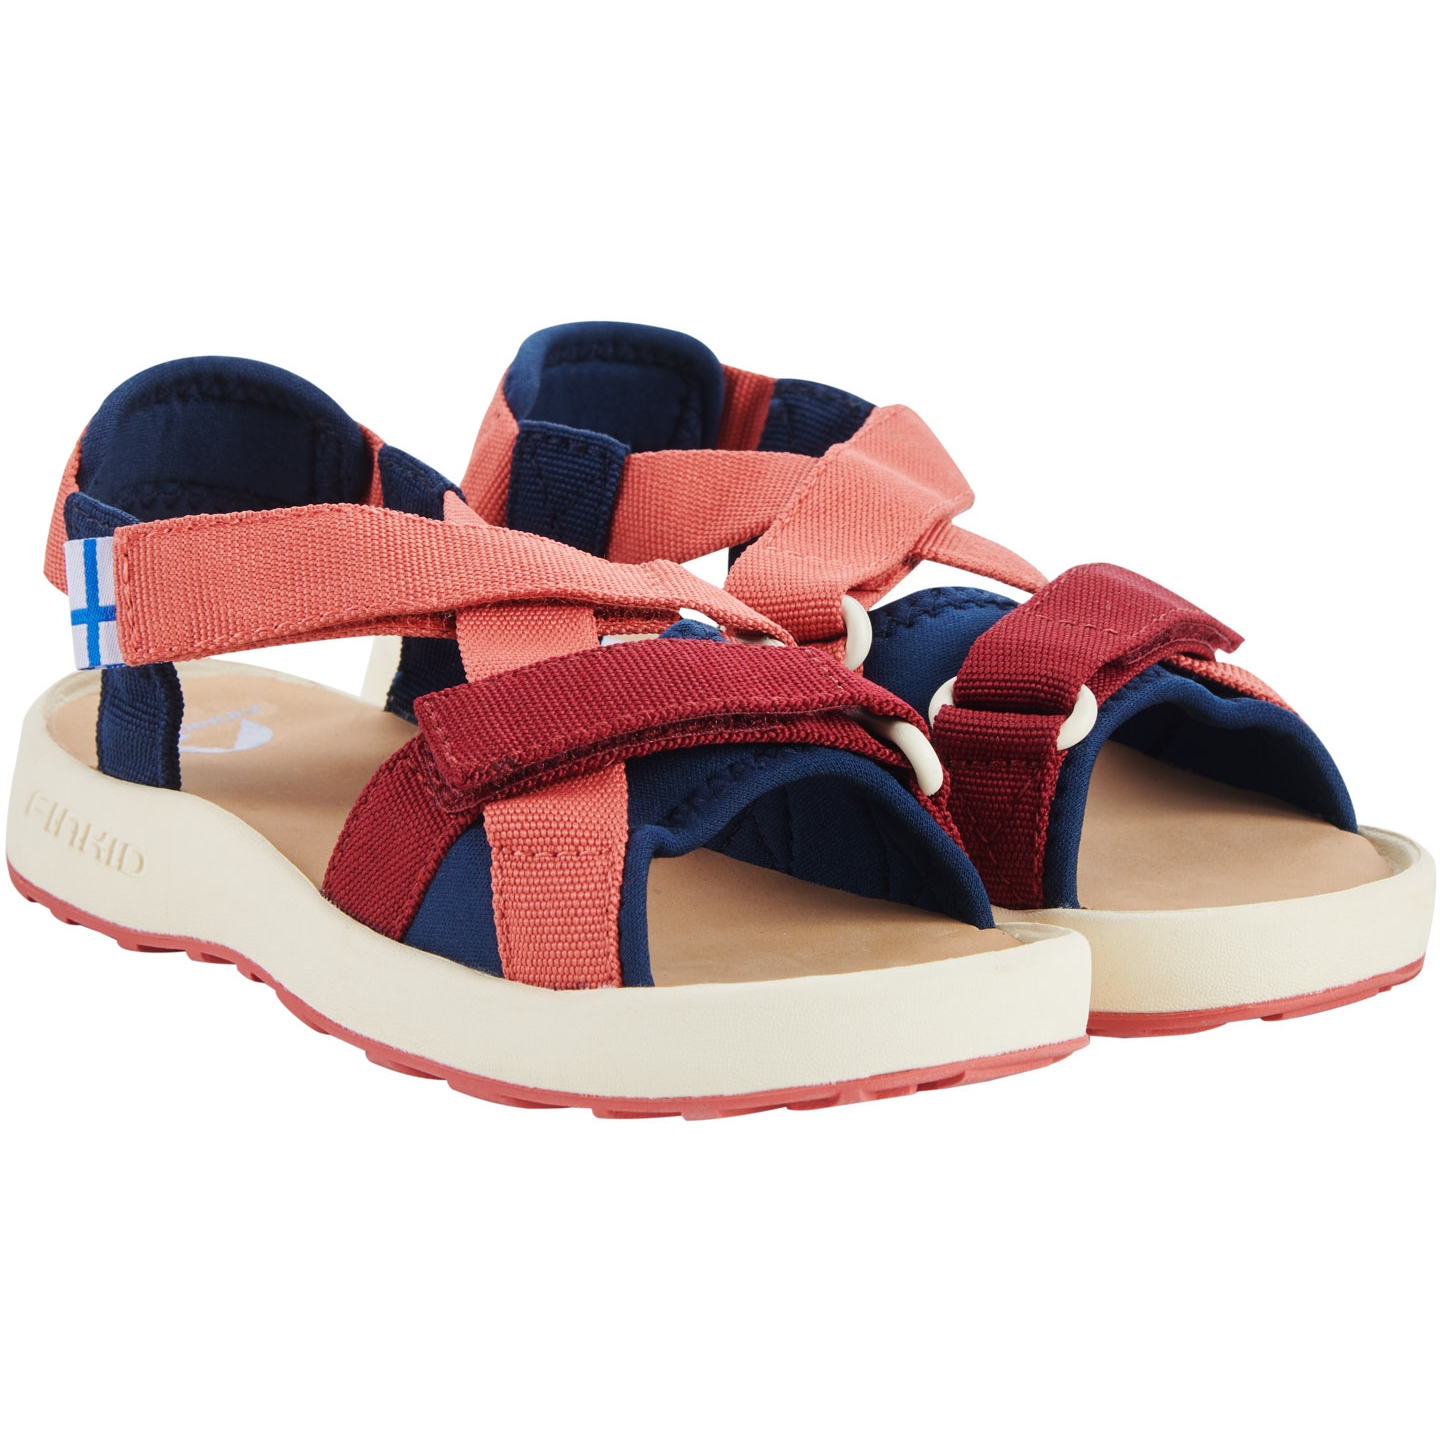 Picture of Finkid SURFFI Sandals Kids - rose/beet red